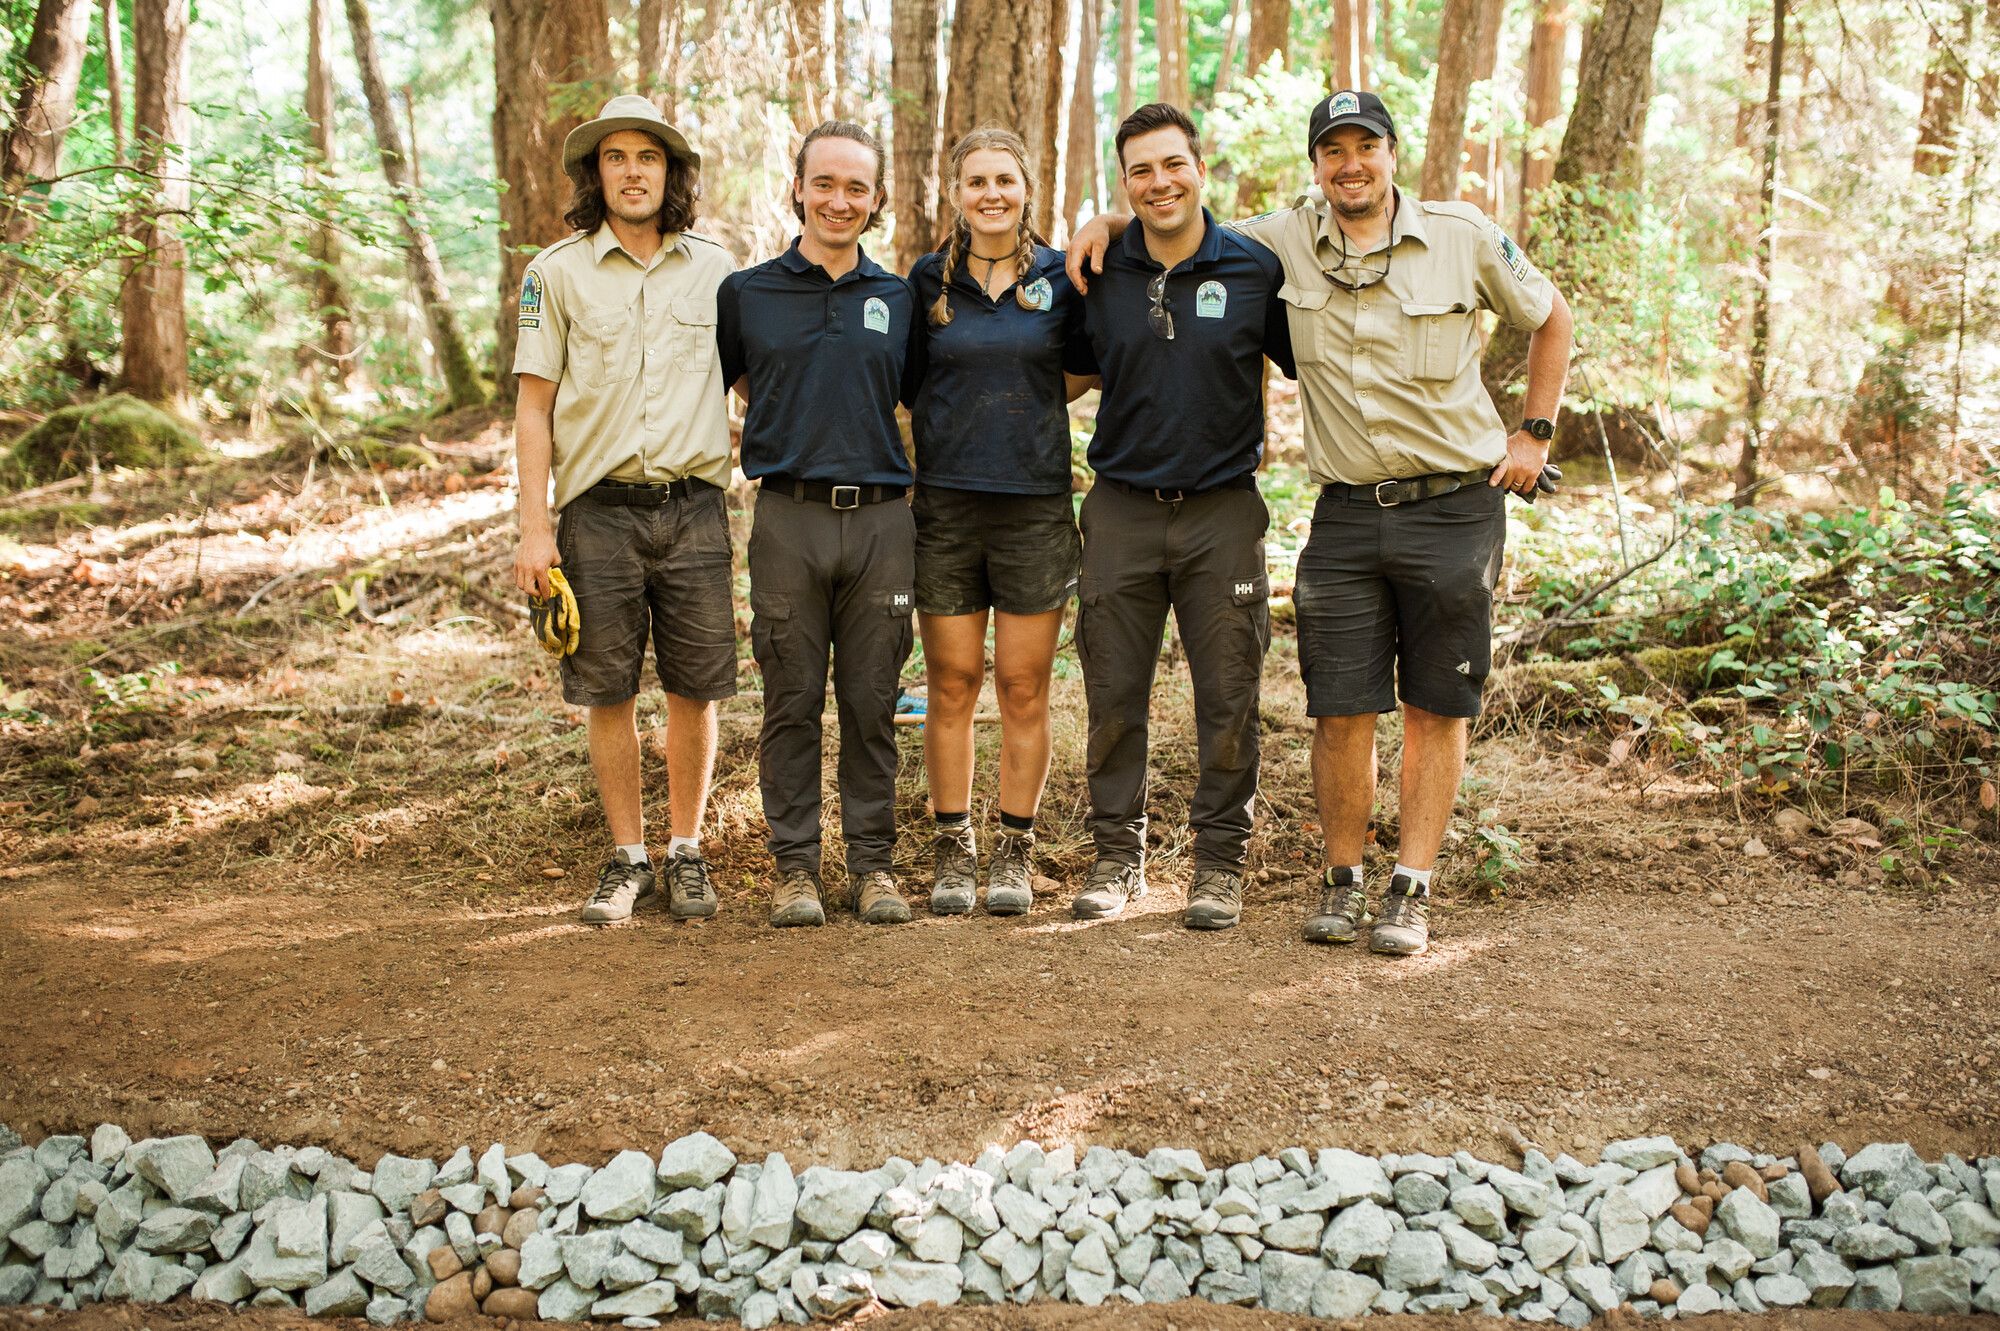 Park rangers and student rangers working on trail upgrades in Boyle Point Park, pause for a photo.